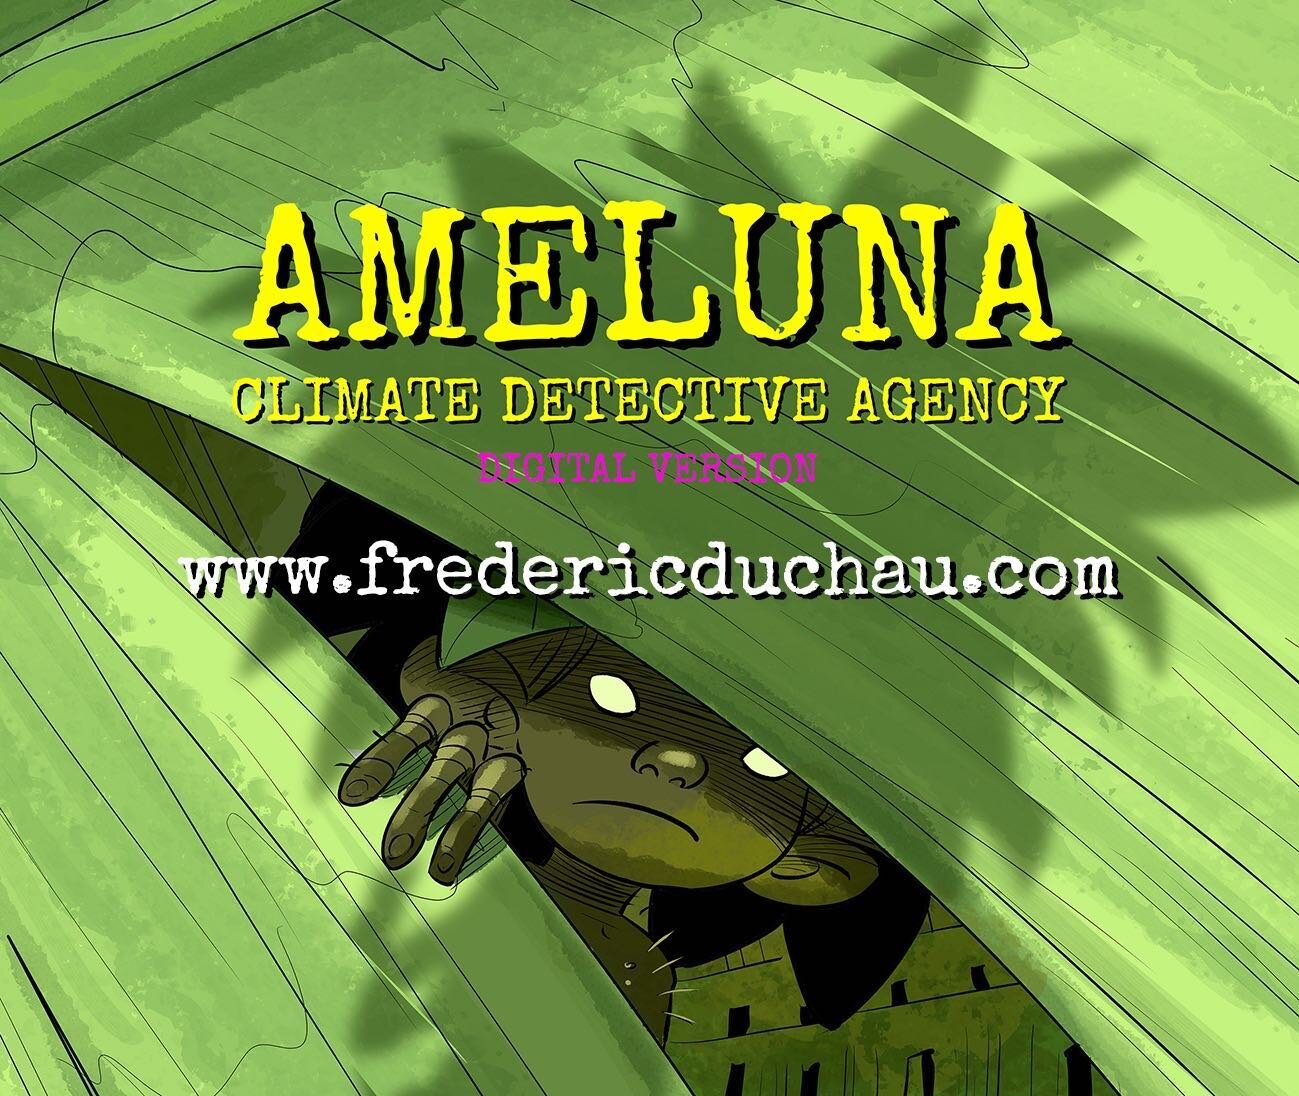 I finally got my e-book done. Only $6.99 for 248 pages of full color fun. Go to the website.
#graphicnovel #ameluna #bd #stripverhaal #climatechange #climatechangeforkids #digitalart #sequentialart #illustration #coloring #comics #childrensbook #kids